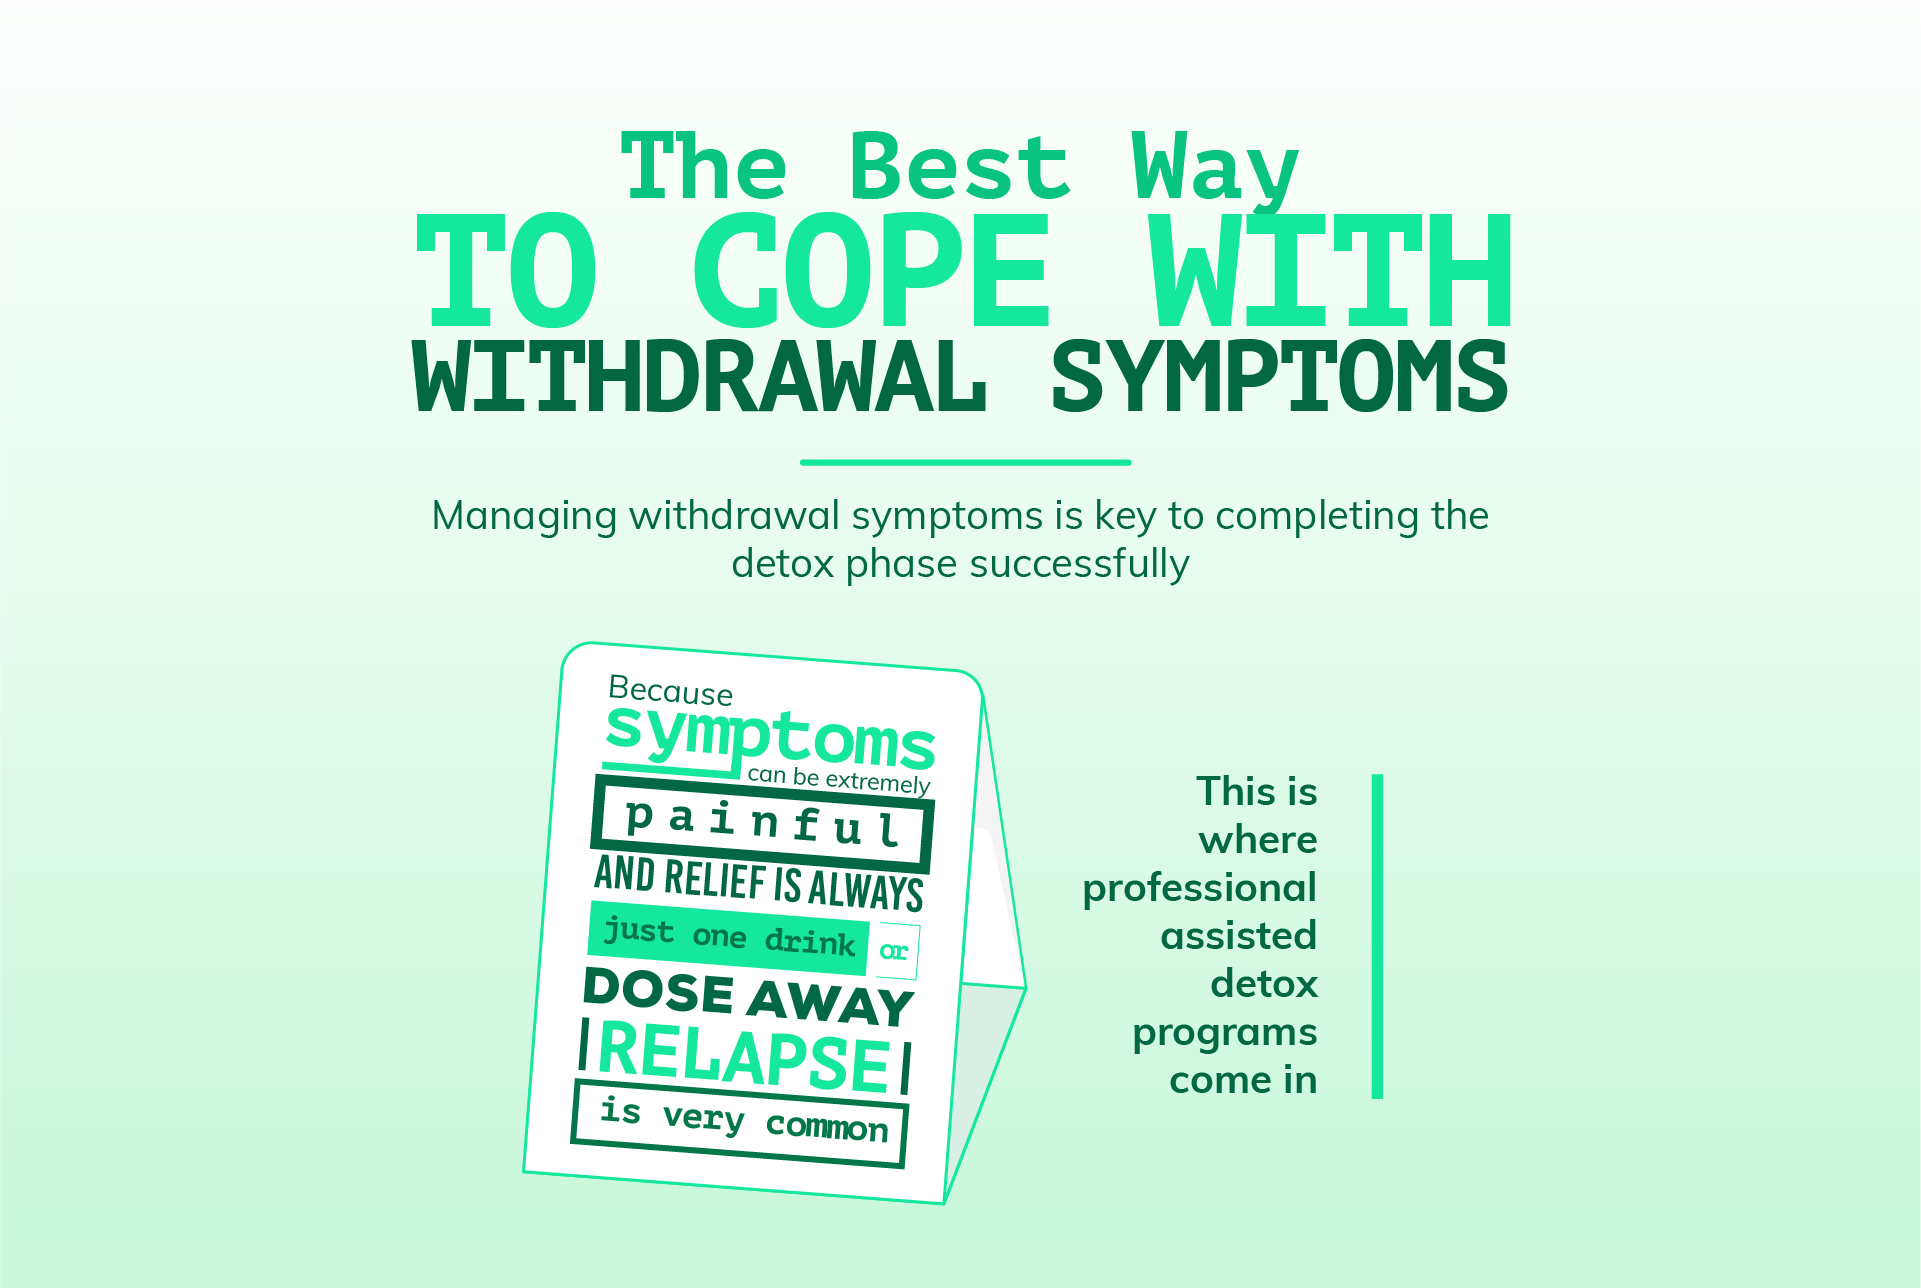 How to Cope With Withdrawal Symptoms